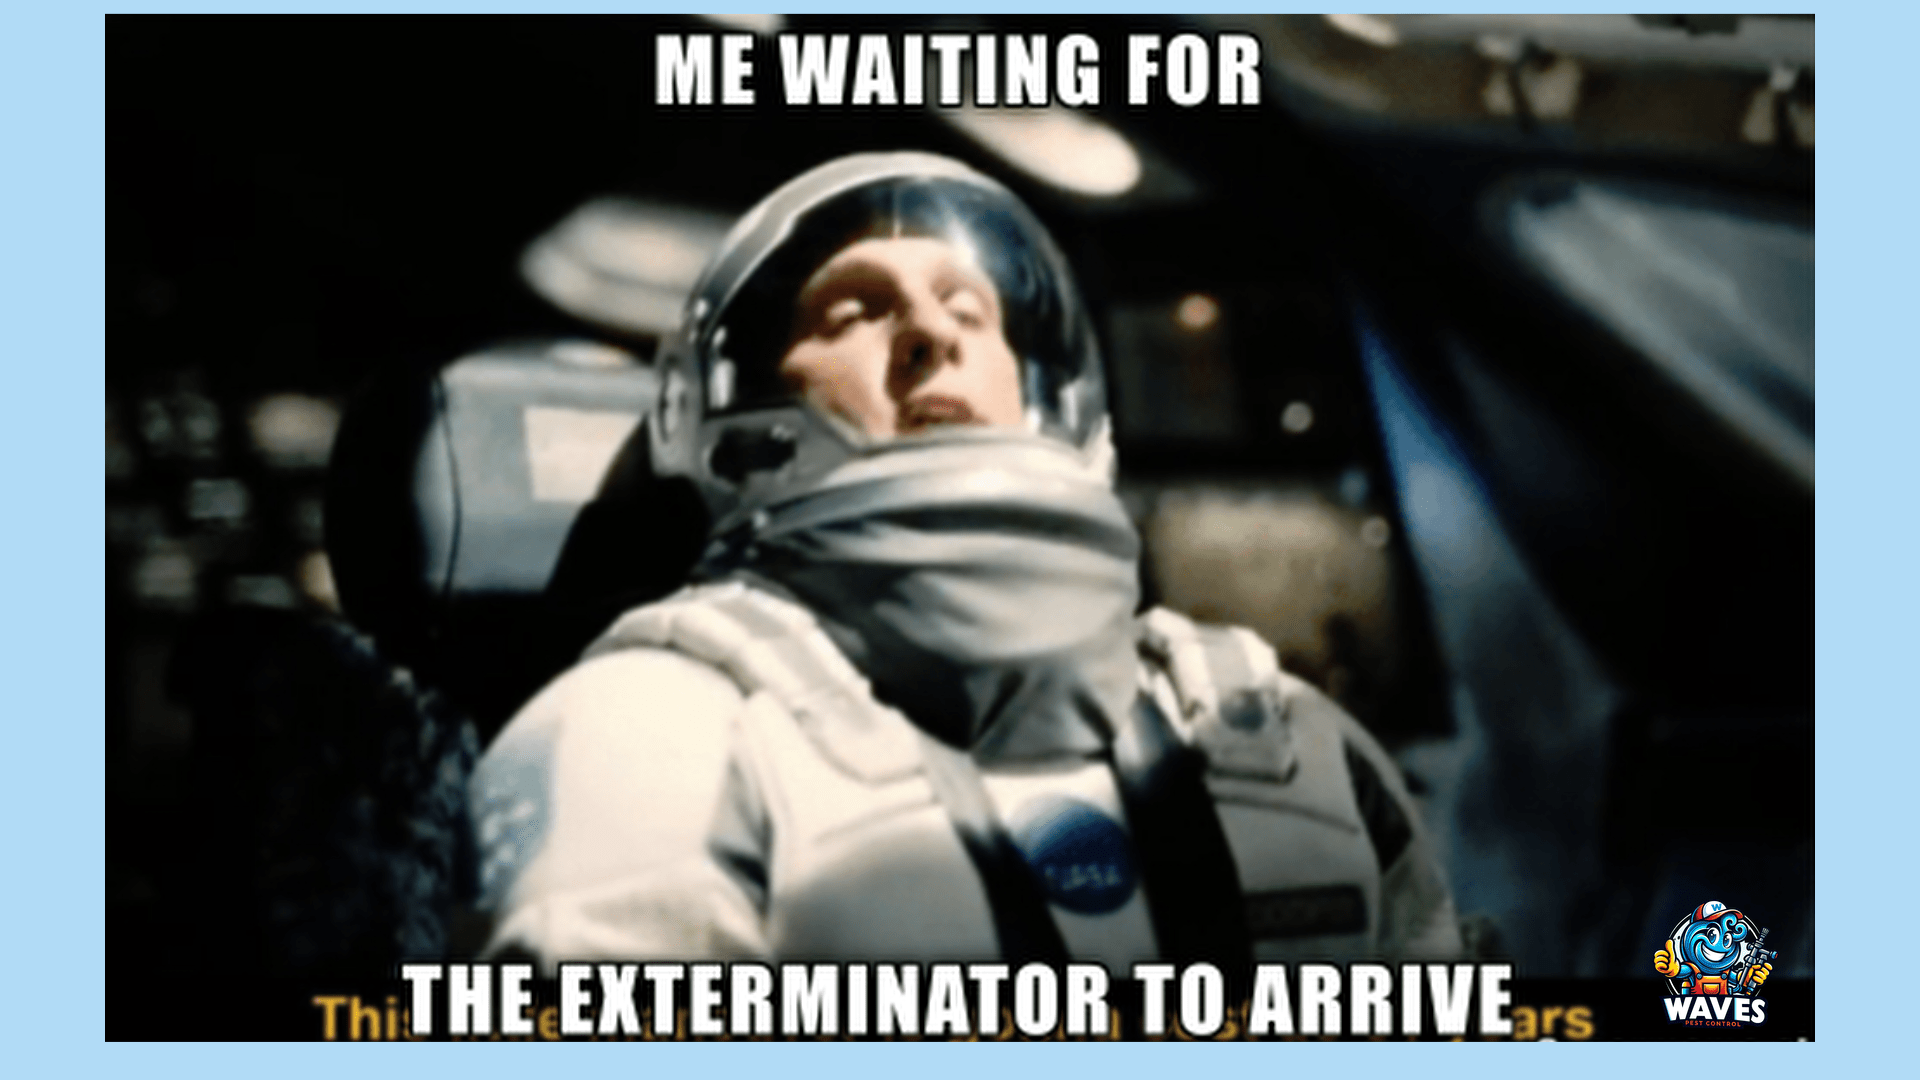 Astronaut in a helmet reclining with a weary expression, overlaid with the text 'ME WAITING FOR THE EXTERMINATOR TO ARRIVE.' Meme image with a humorous tone, referencing a delayed response, possibly for pest control services.